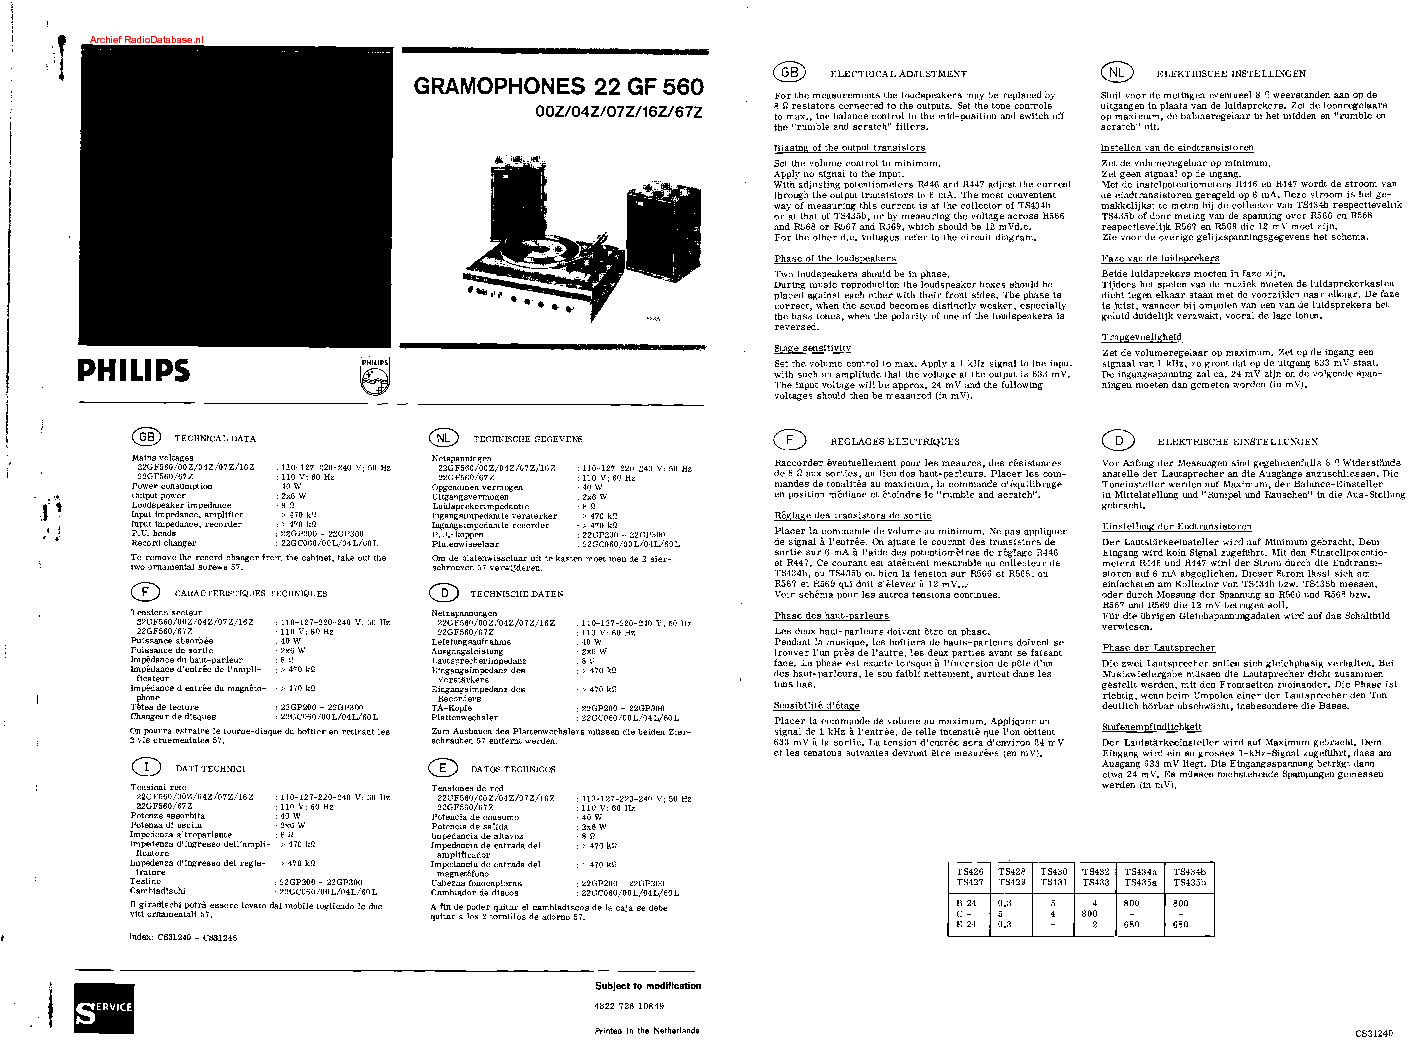 PHILIPS 22GF560 SM service manual (1st page)